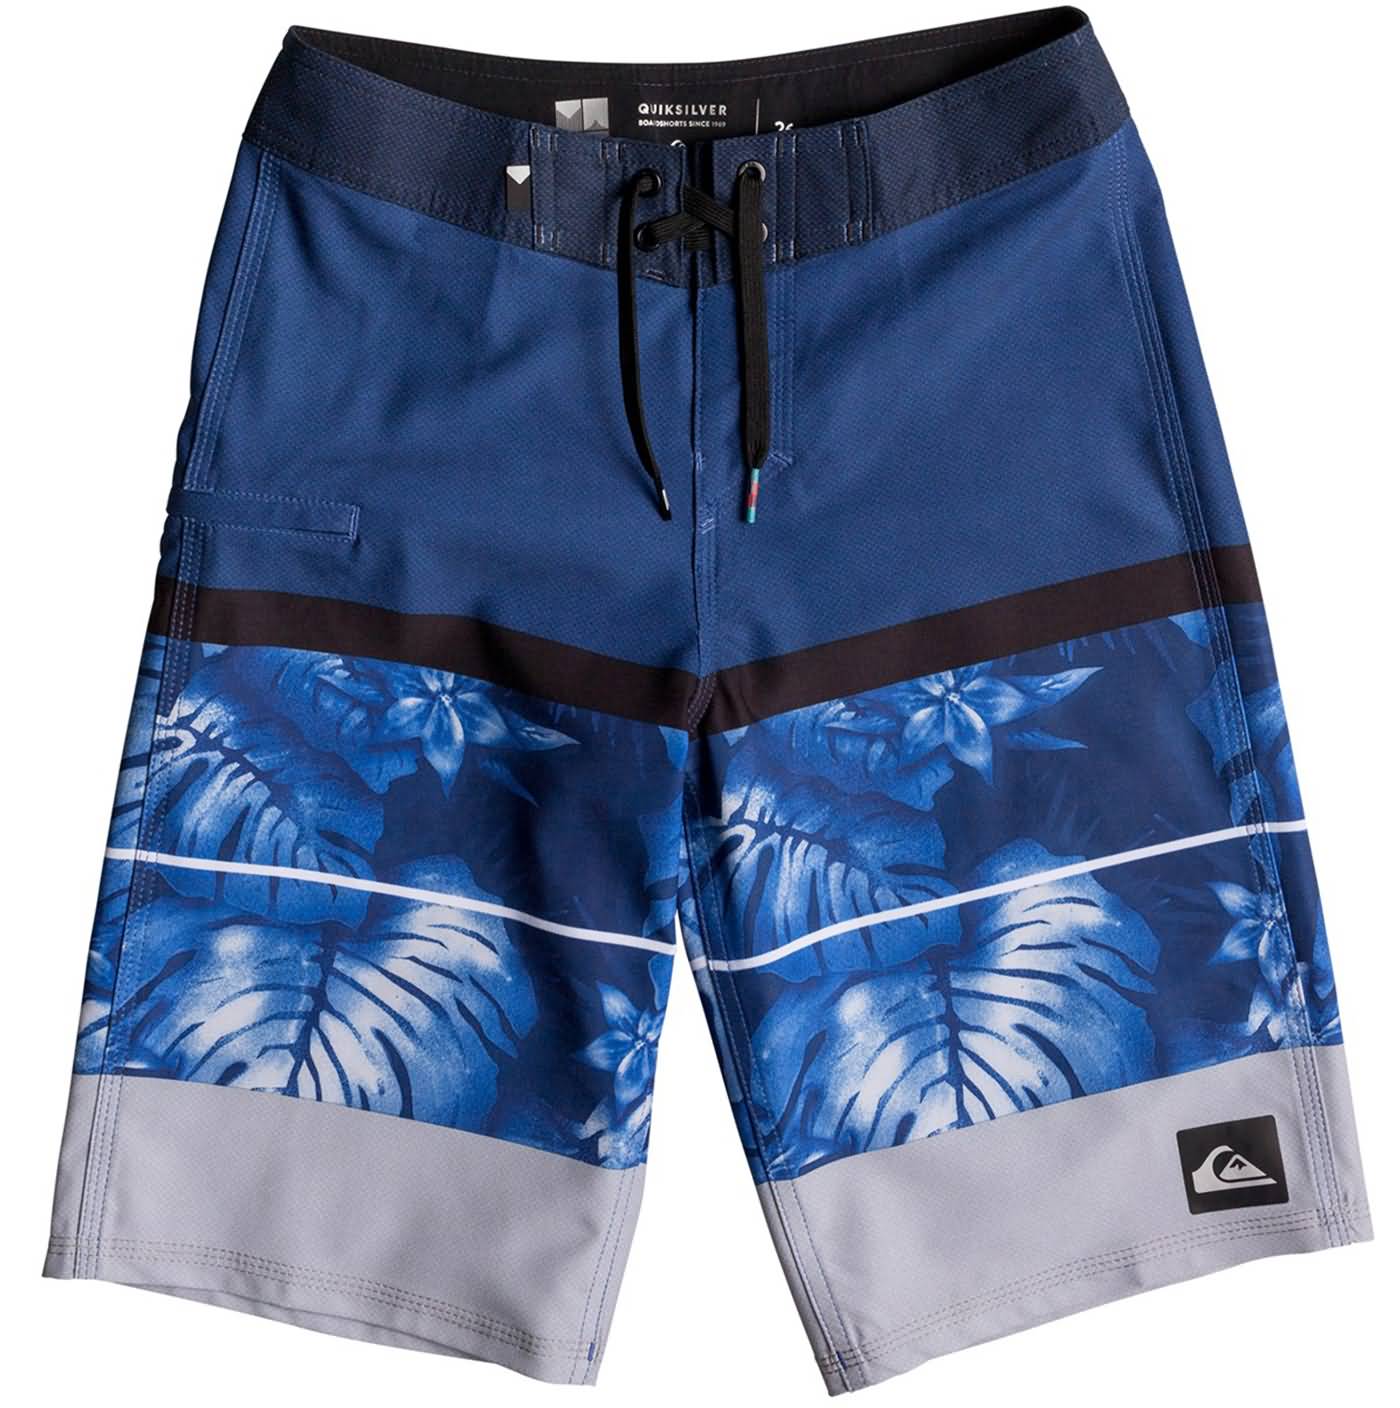 Quiksilver Surf Fall 2017 Youth Boys Beach Boardshorts Collection